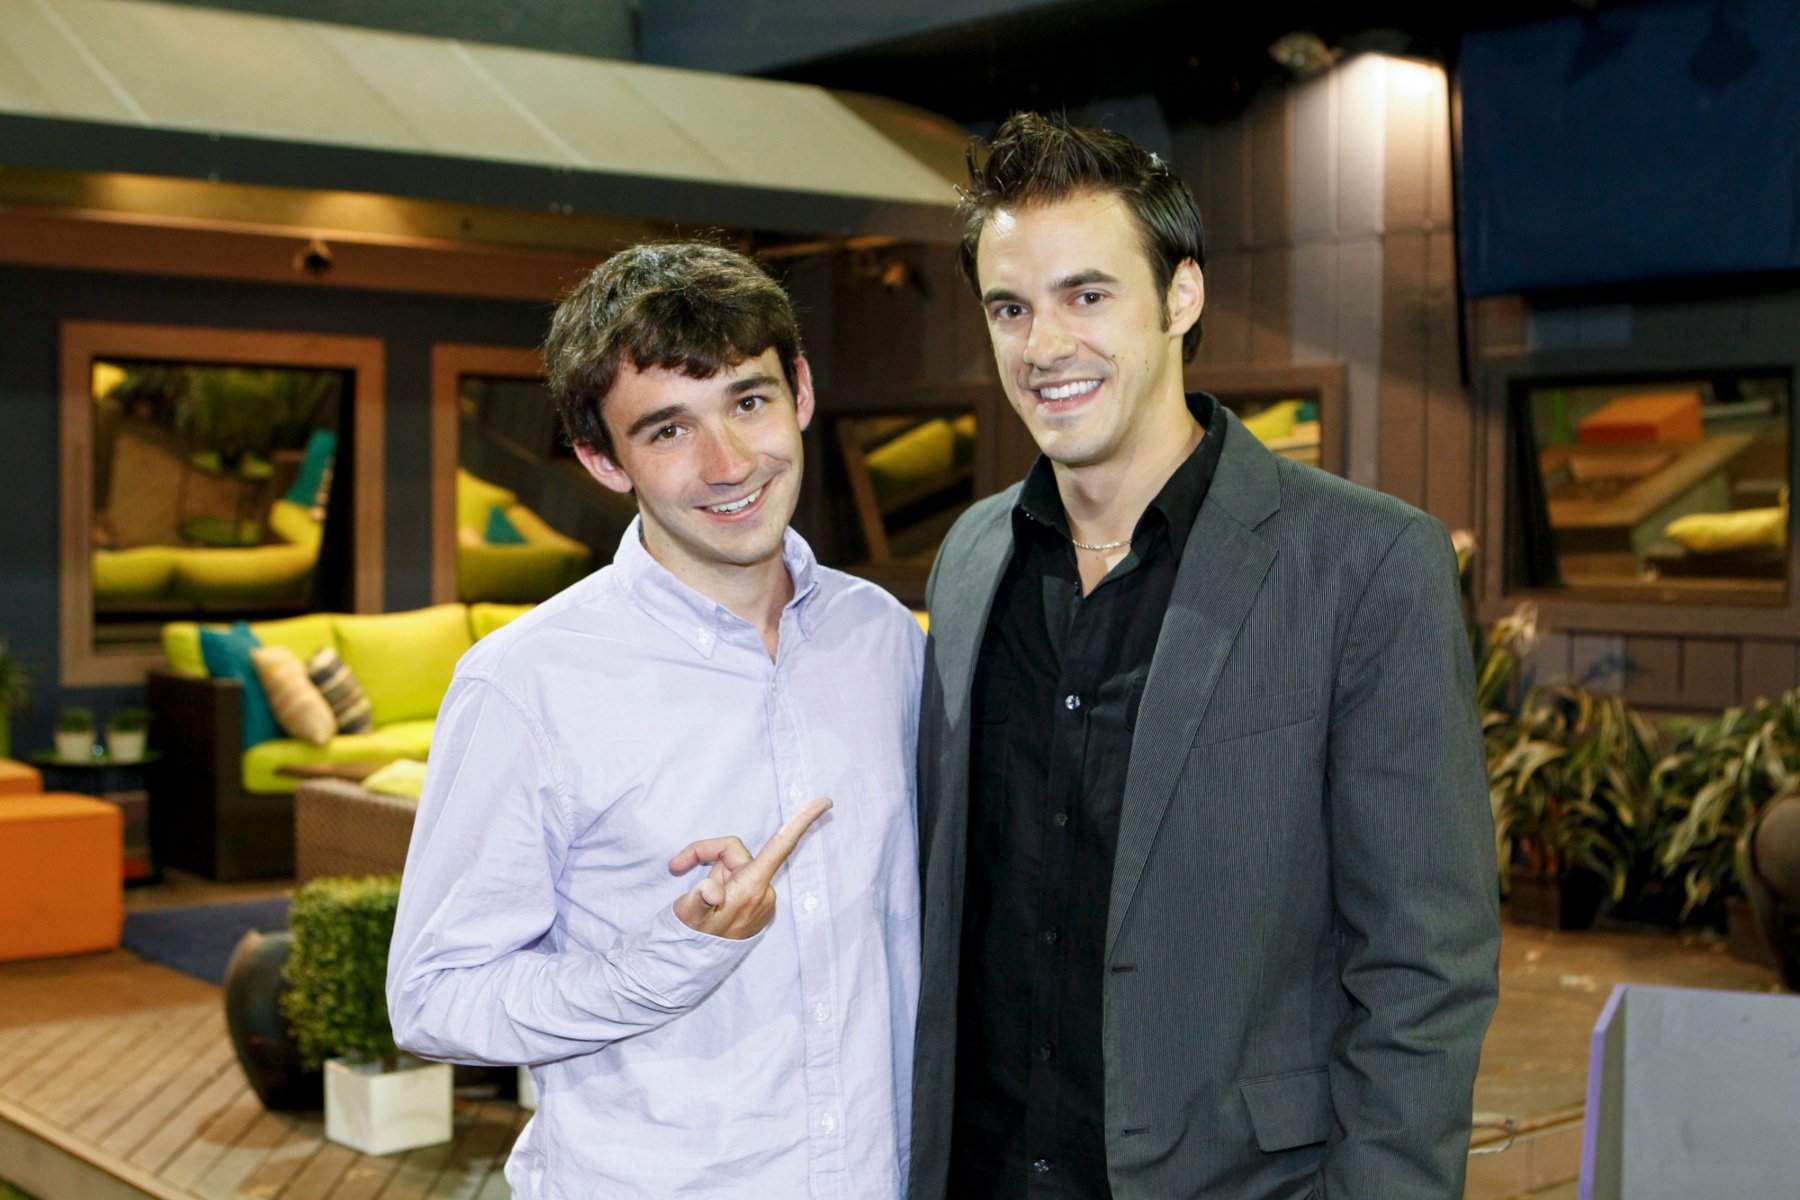 Ian Terry and Dan Gheesling, the winners and runners-up of 'Big Brother' season 14.  The two sit next to each other.  Ian looks up at Dan and Dan is wearing a dark shirt and gray blazer.